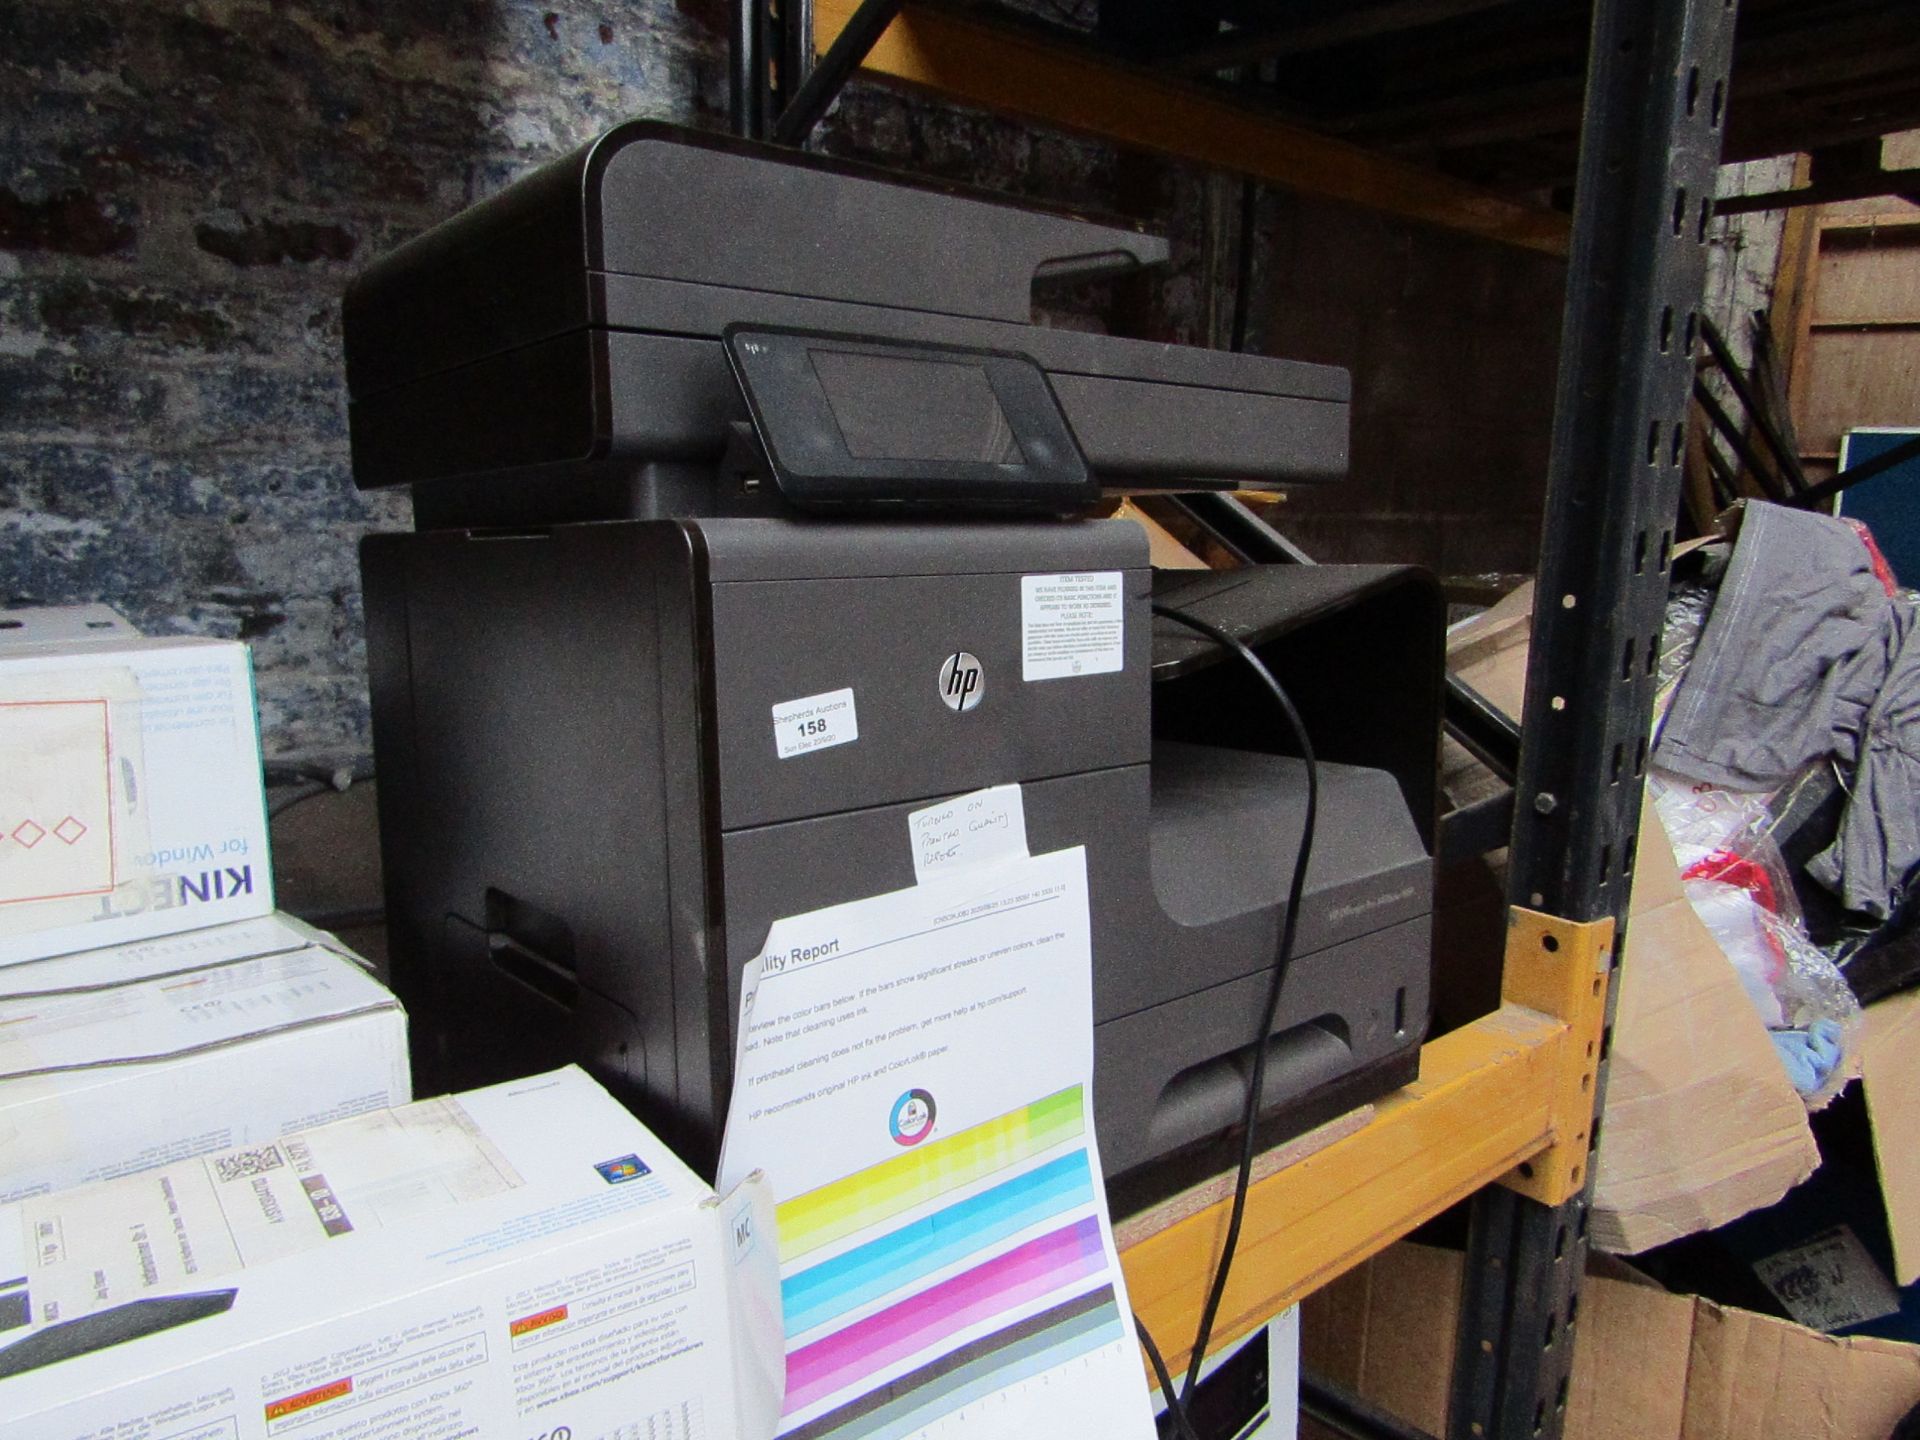 HP OfficJet Pro X476DW MFP printer, powers on and we have printed a Print Quality report off, not